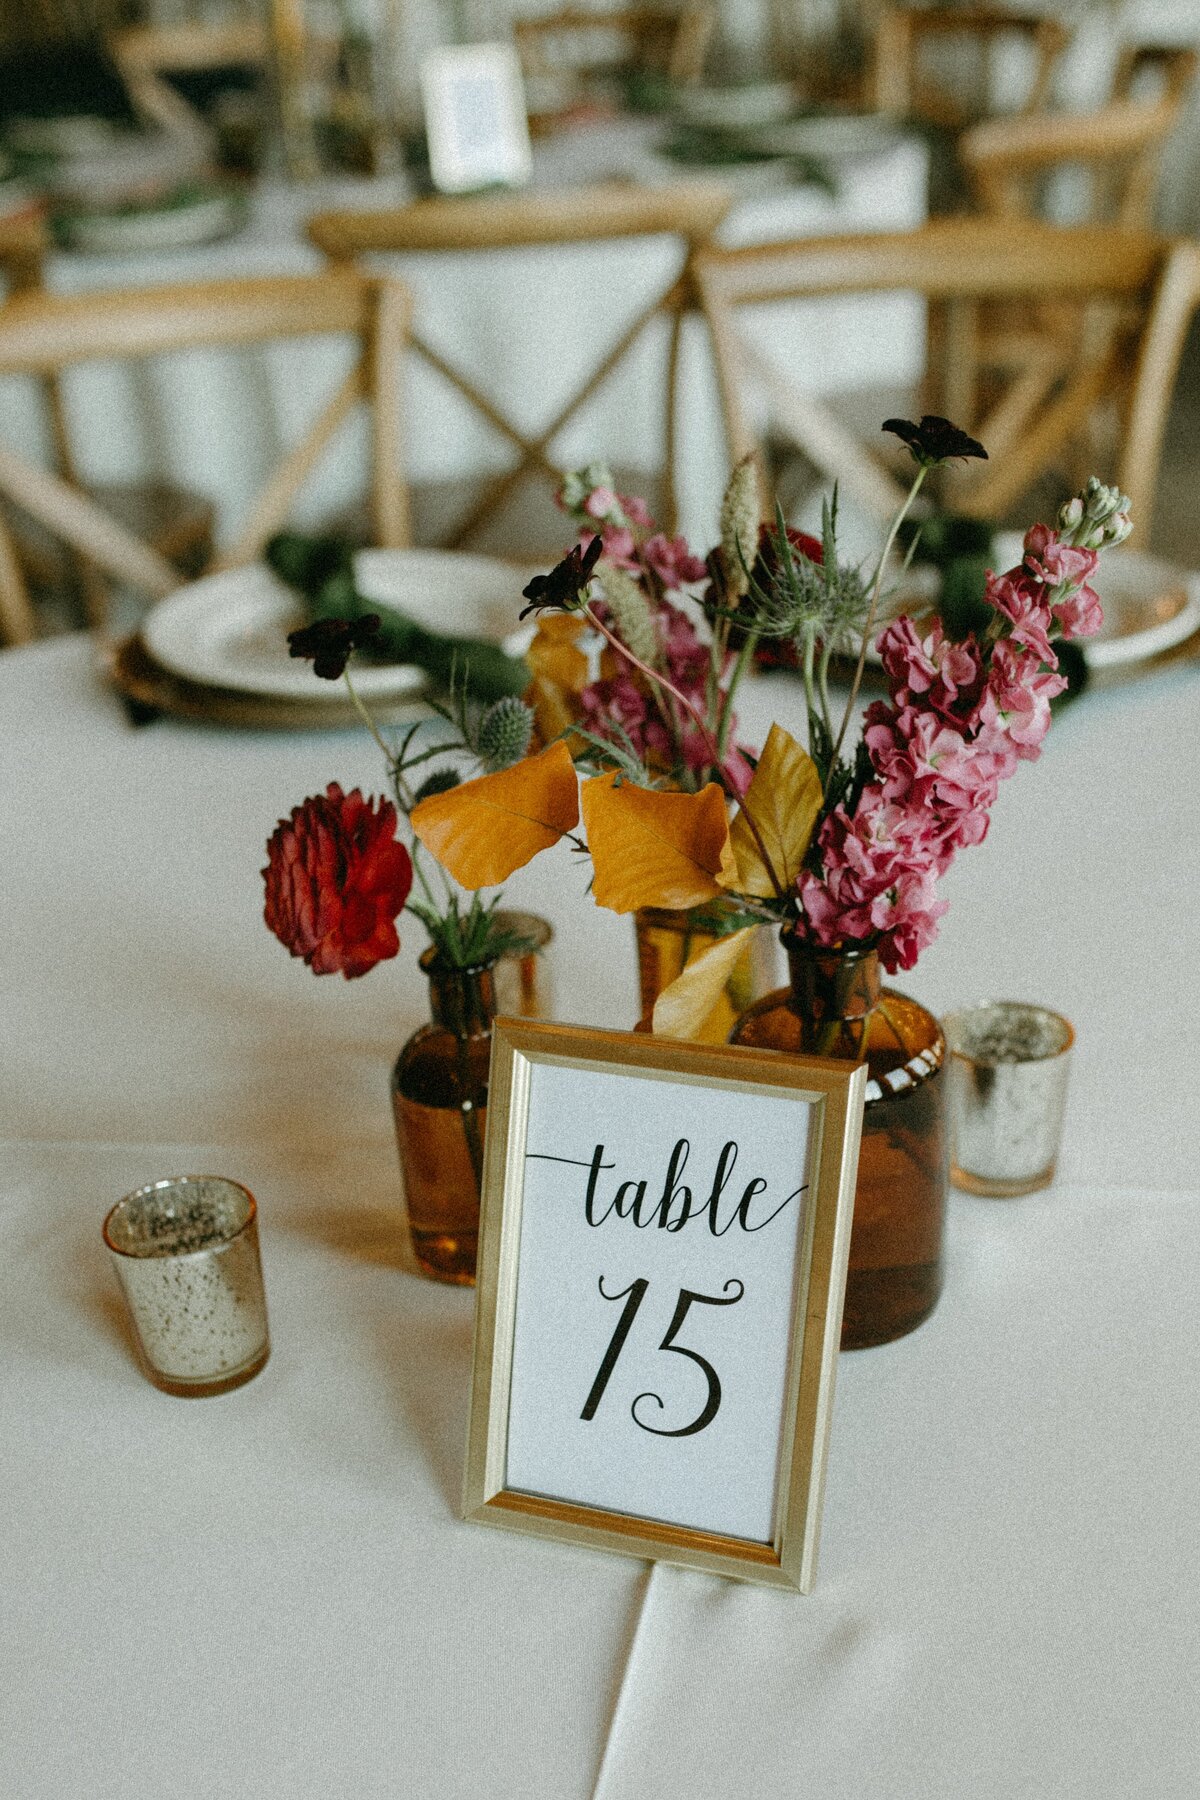 Elegant wedding table setting at Park Farm Winery featuring a floral centerpiece and a gold-framed table number 15 sign, with candles and wooden chairs in the background.